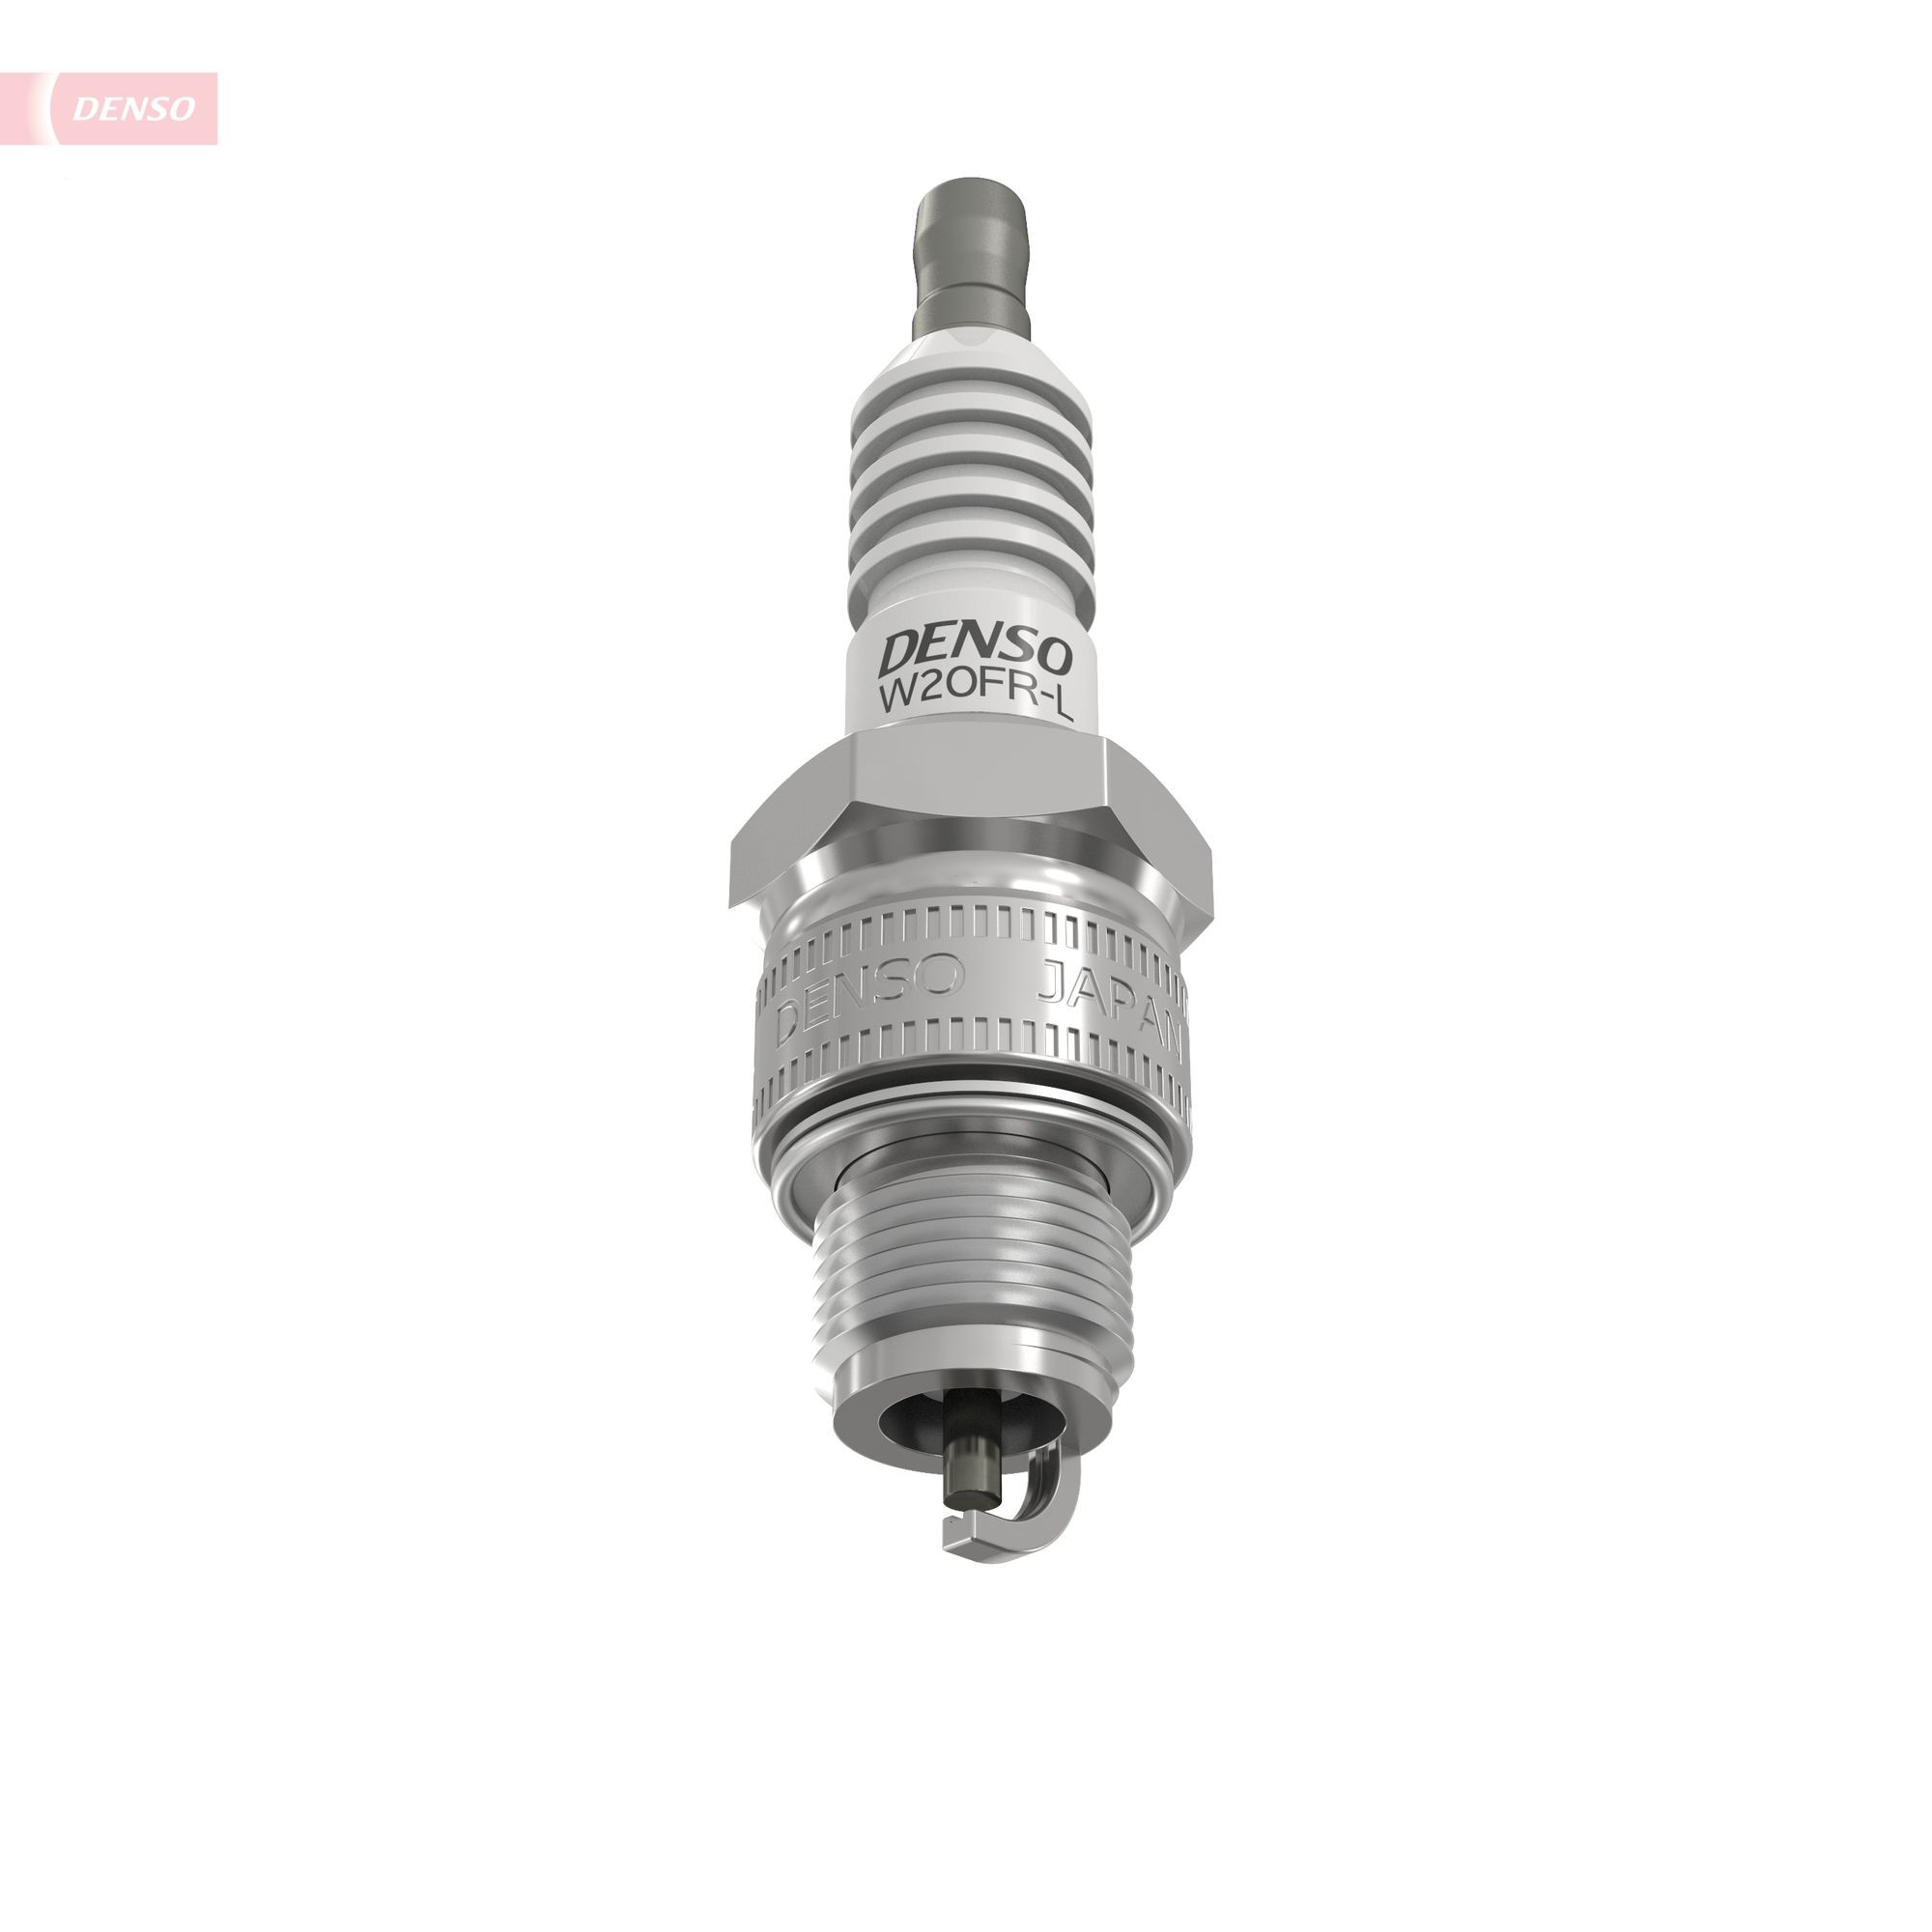 W20FRL Spark plug DENSO W20FR-L review and test